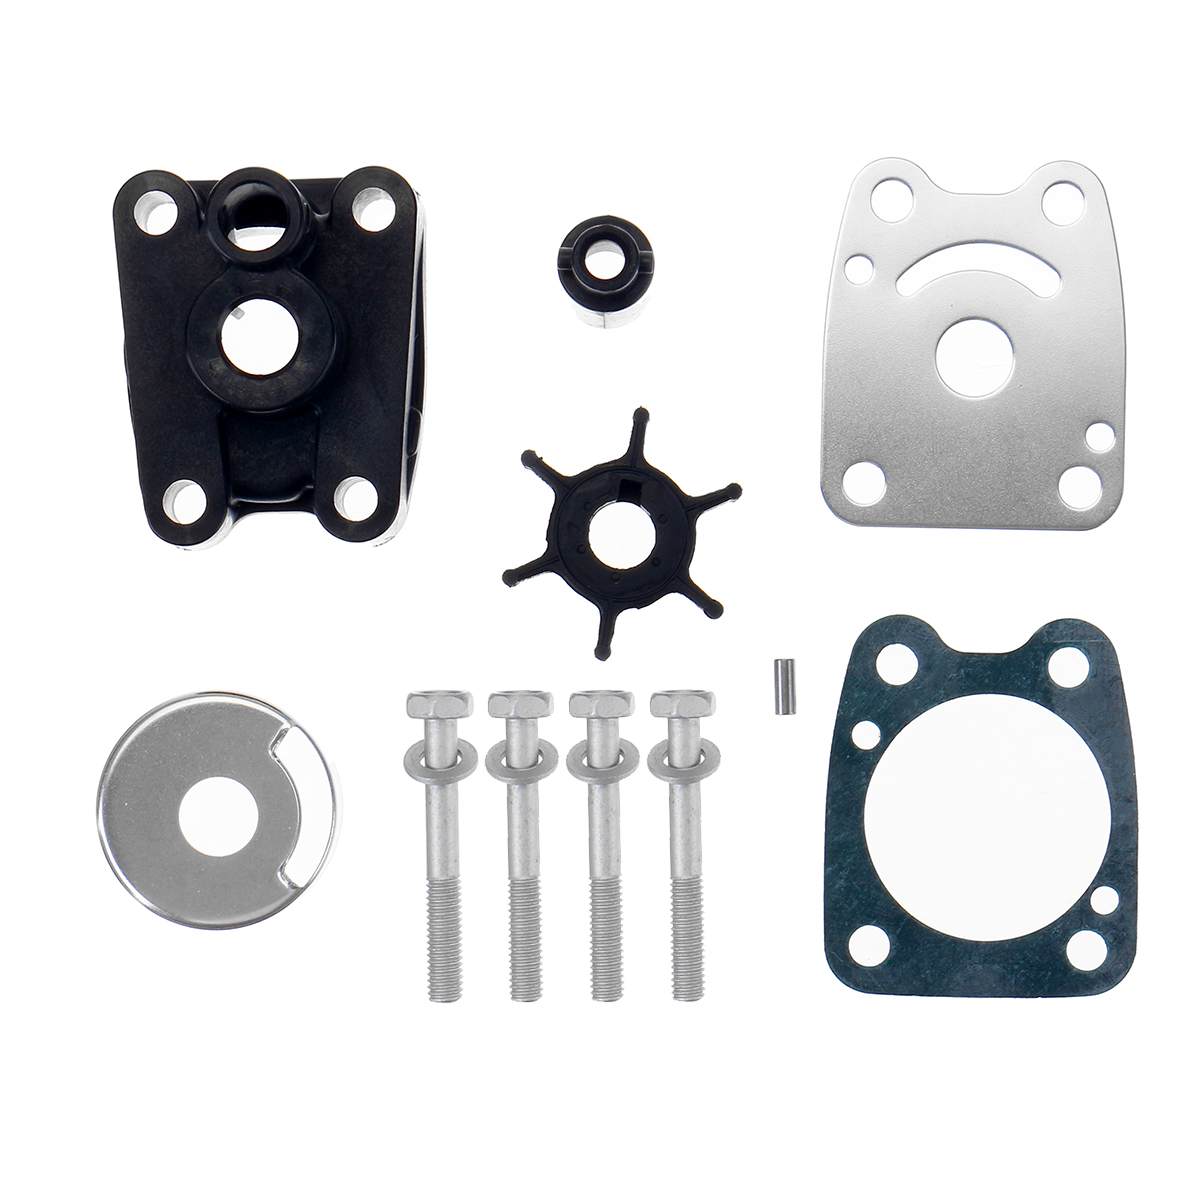 Water Pump Impeller Kit Replacement Outboard Parts for Yamaha 4/5hp 6E0-W0078-A2 Impeller Water Pump Gasket Repair Tool Kits